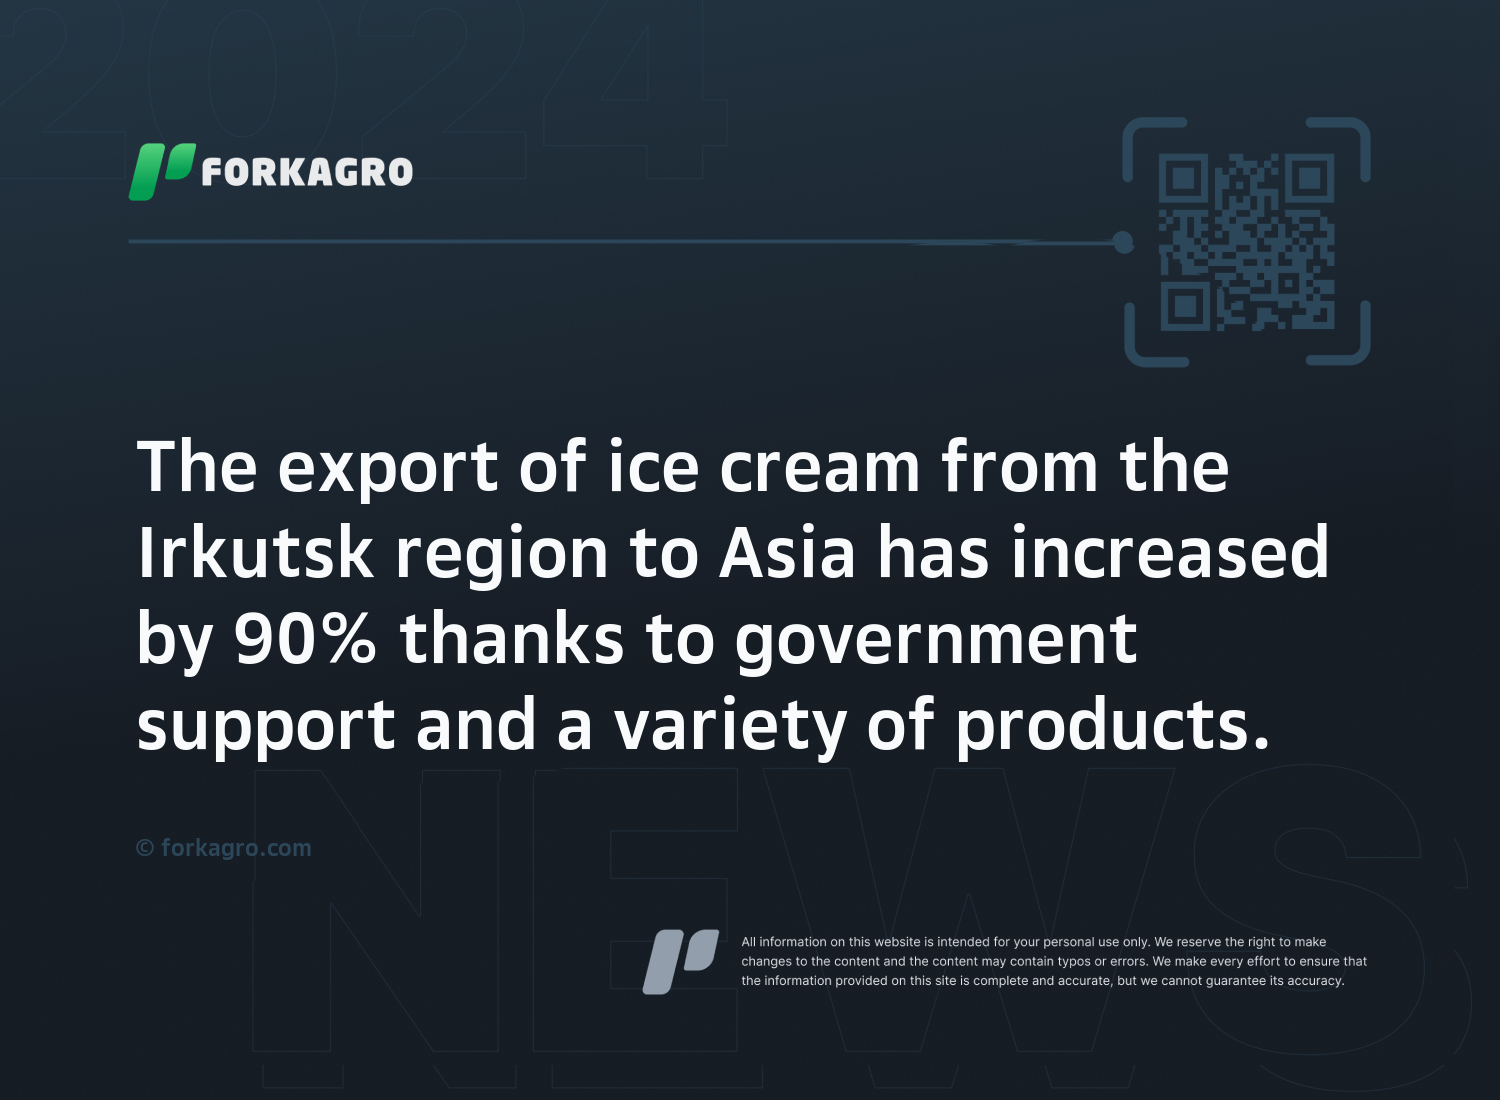 The export of ice cream from the Irkutsk region to Asia has increased by 90% thanks to government support and a variety of products.